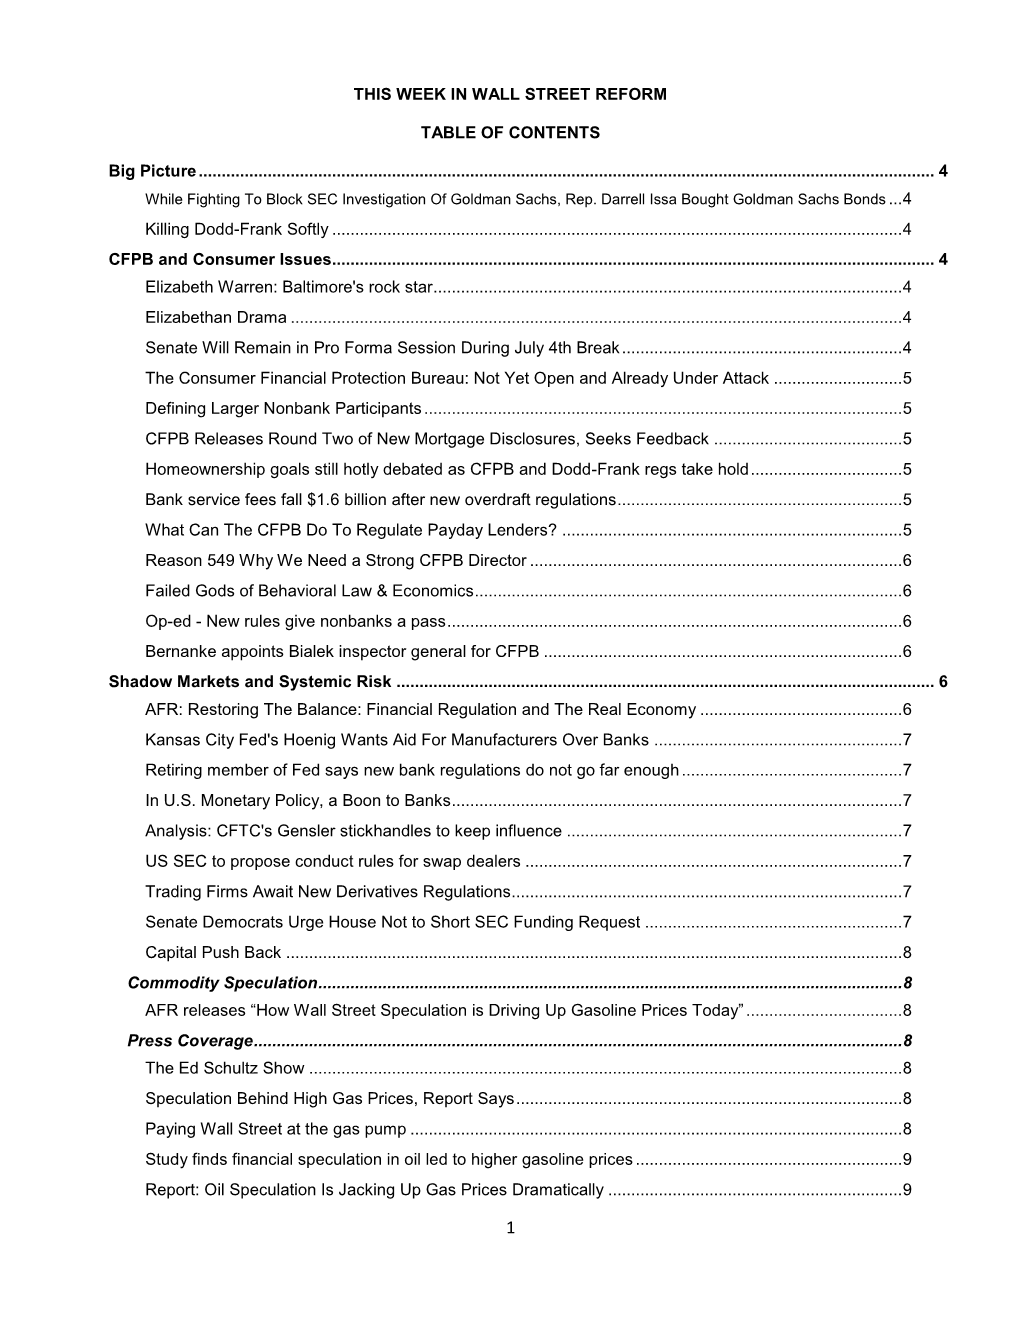 This Week in Wall Street Reform Table of Contents